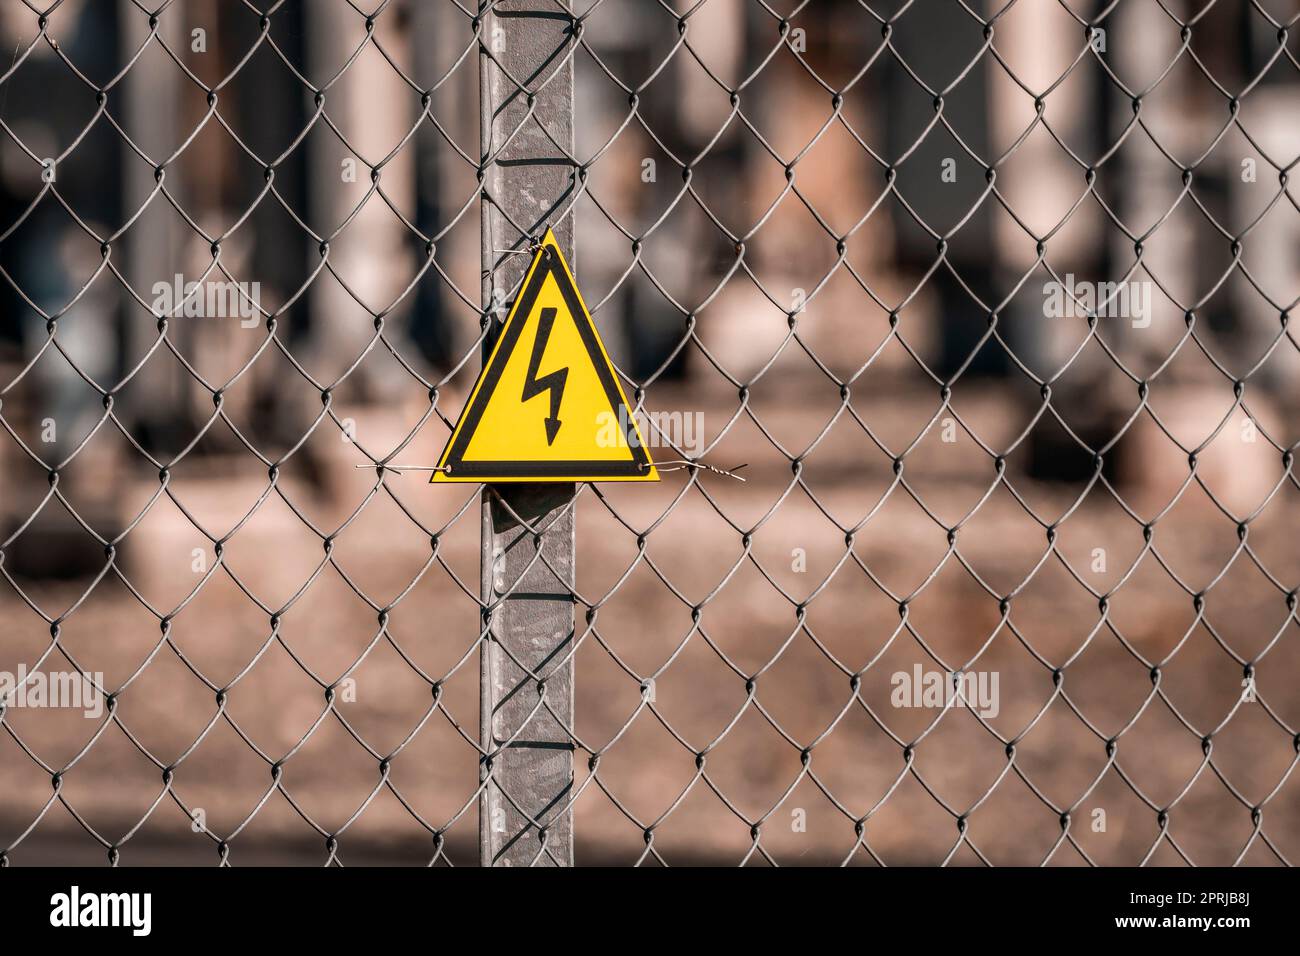 Electrical hazard sign placed on a fence of an electrical substation Stock Photo